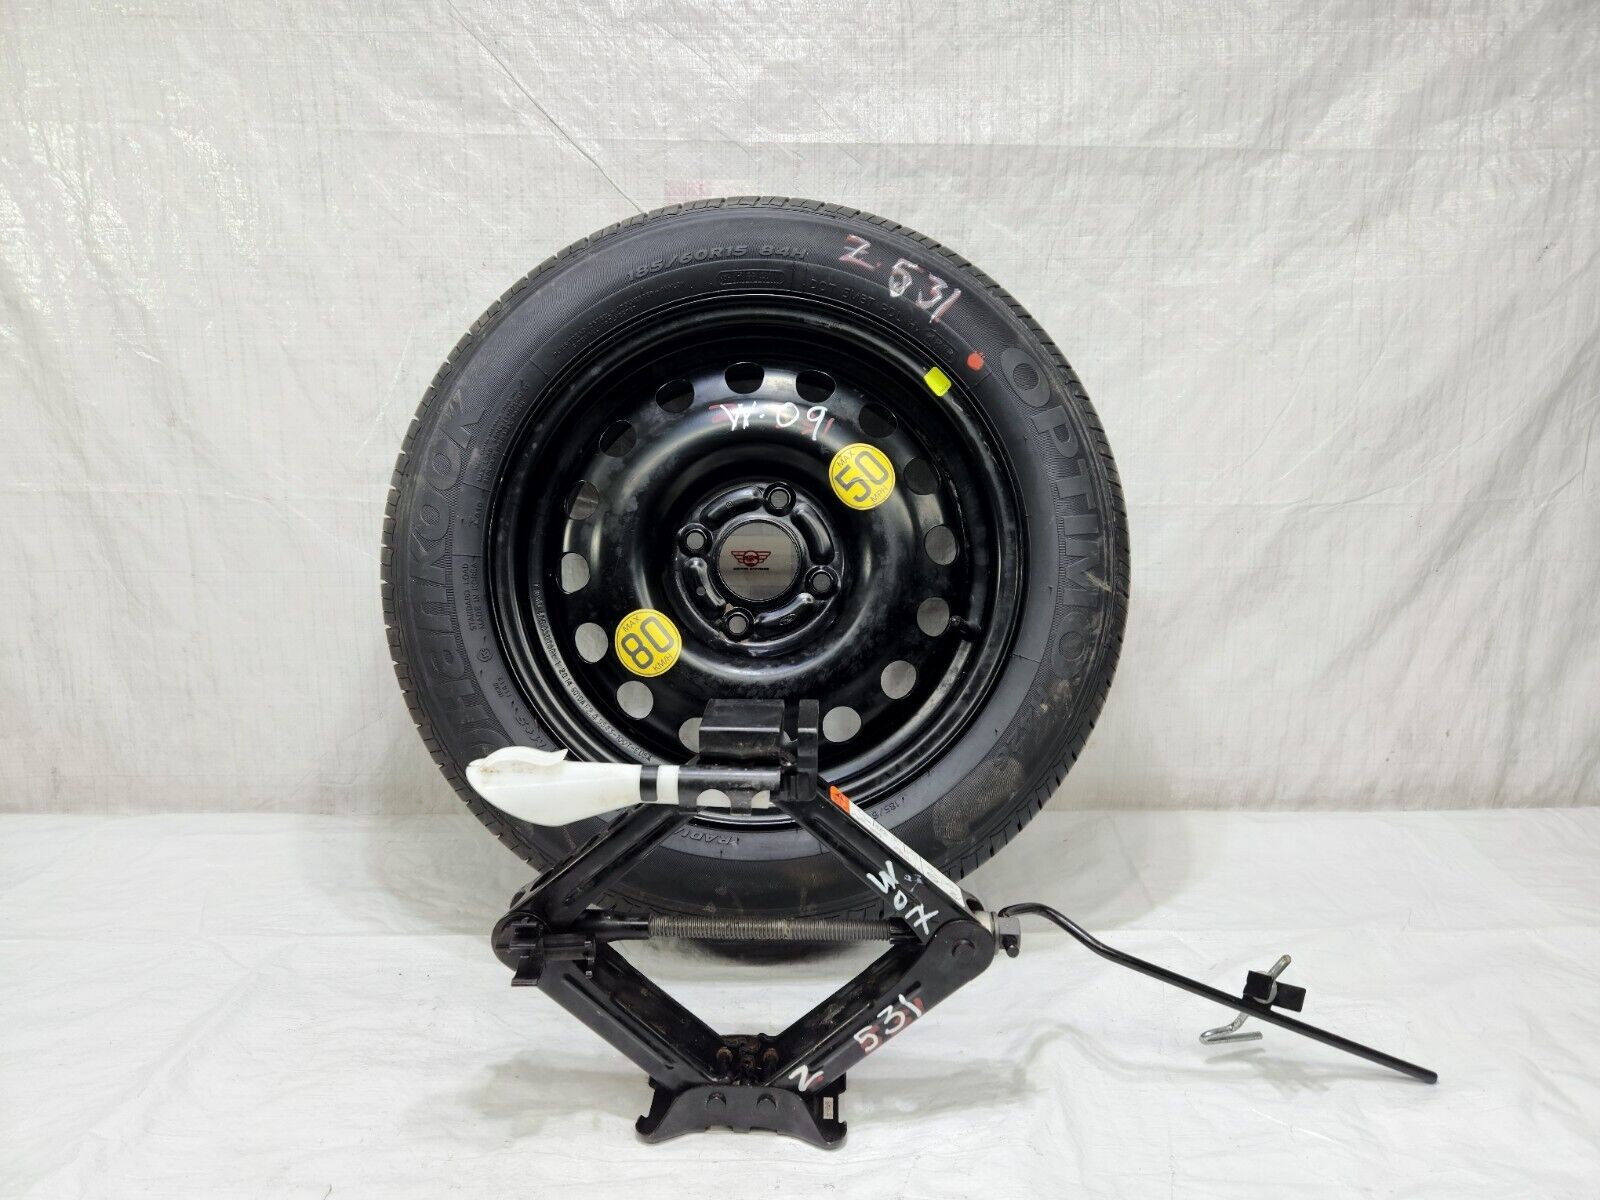 2014-2019 Ford Fiesta ST Hatchback Spare Tire Wheel with Jack Kit Tool 185/60R15